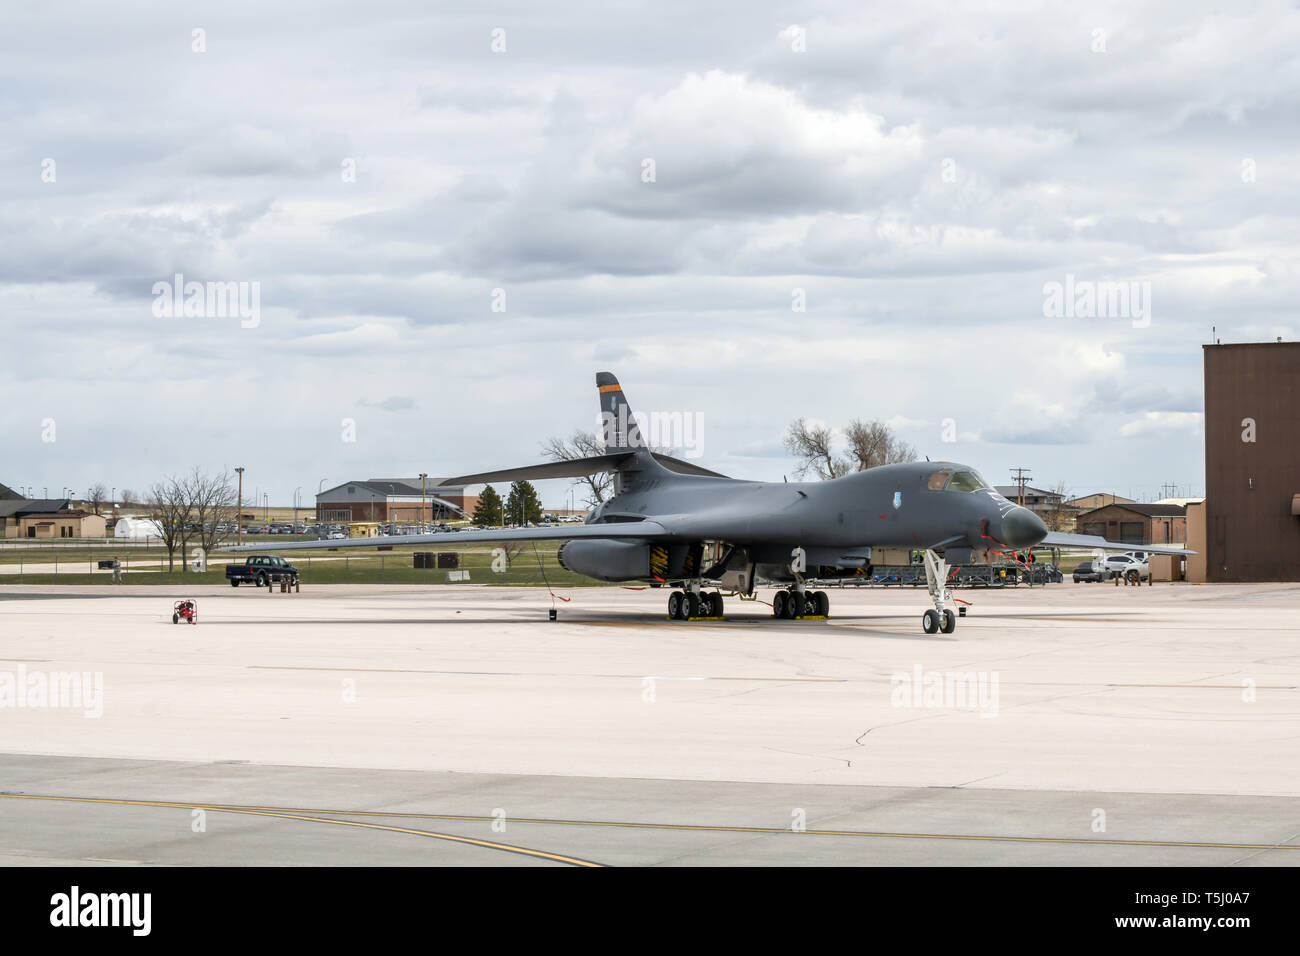 A B-1B Lancer is put on static display by the Pride Hangar at Ellsworth Air Force Base, S.D., April 18, 2019. Ellsworth bombers and a B-25 Mitchell were displayed for the base community to view during an event commemorating the 77th anniversary of the Doolittle Raid. (U.S. Air Force photo by Airman 1st Class Christina M. Bennett) Stock Photo